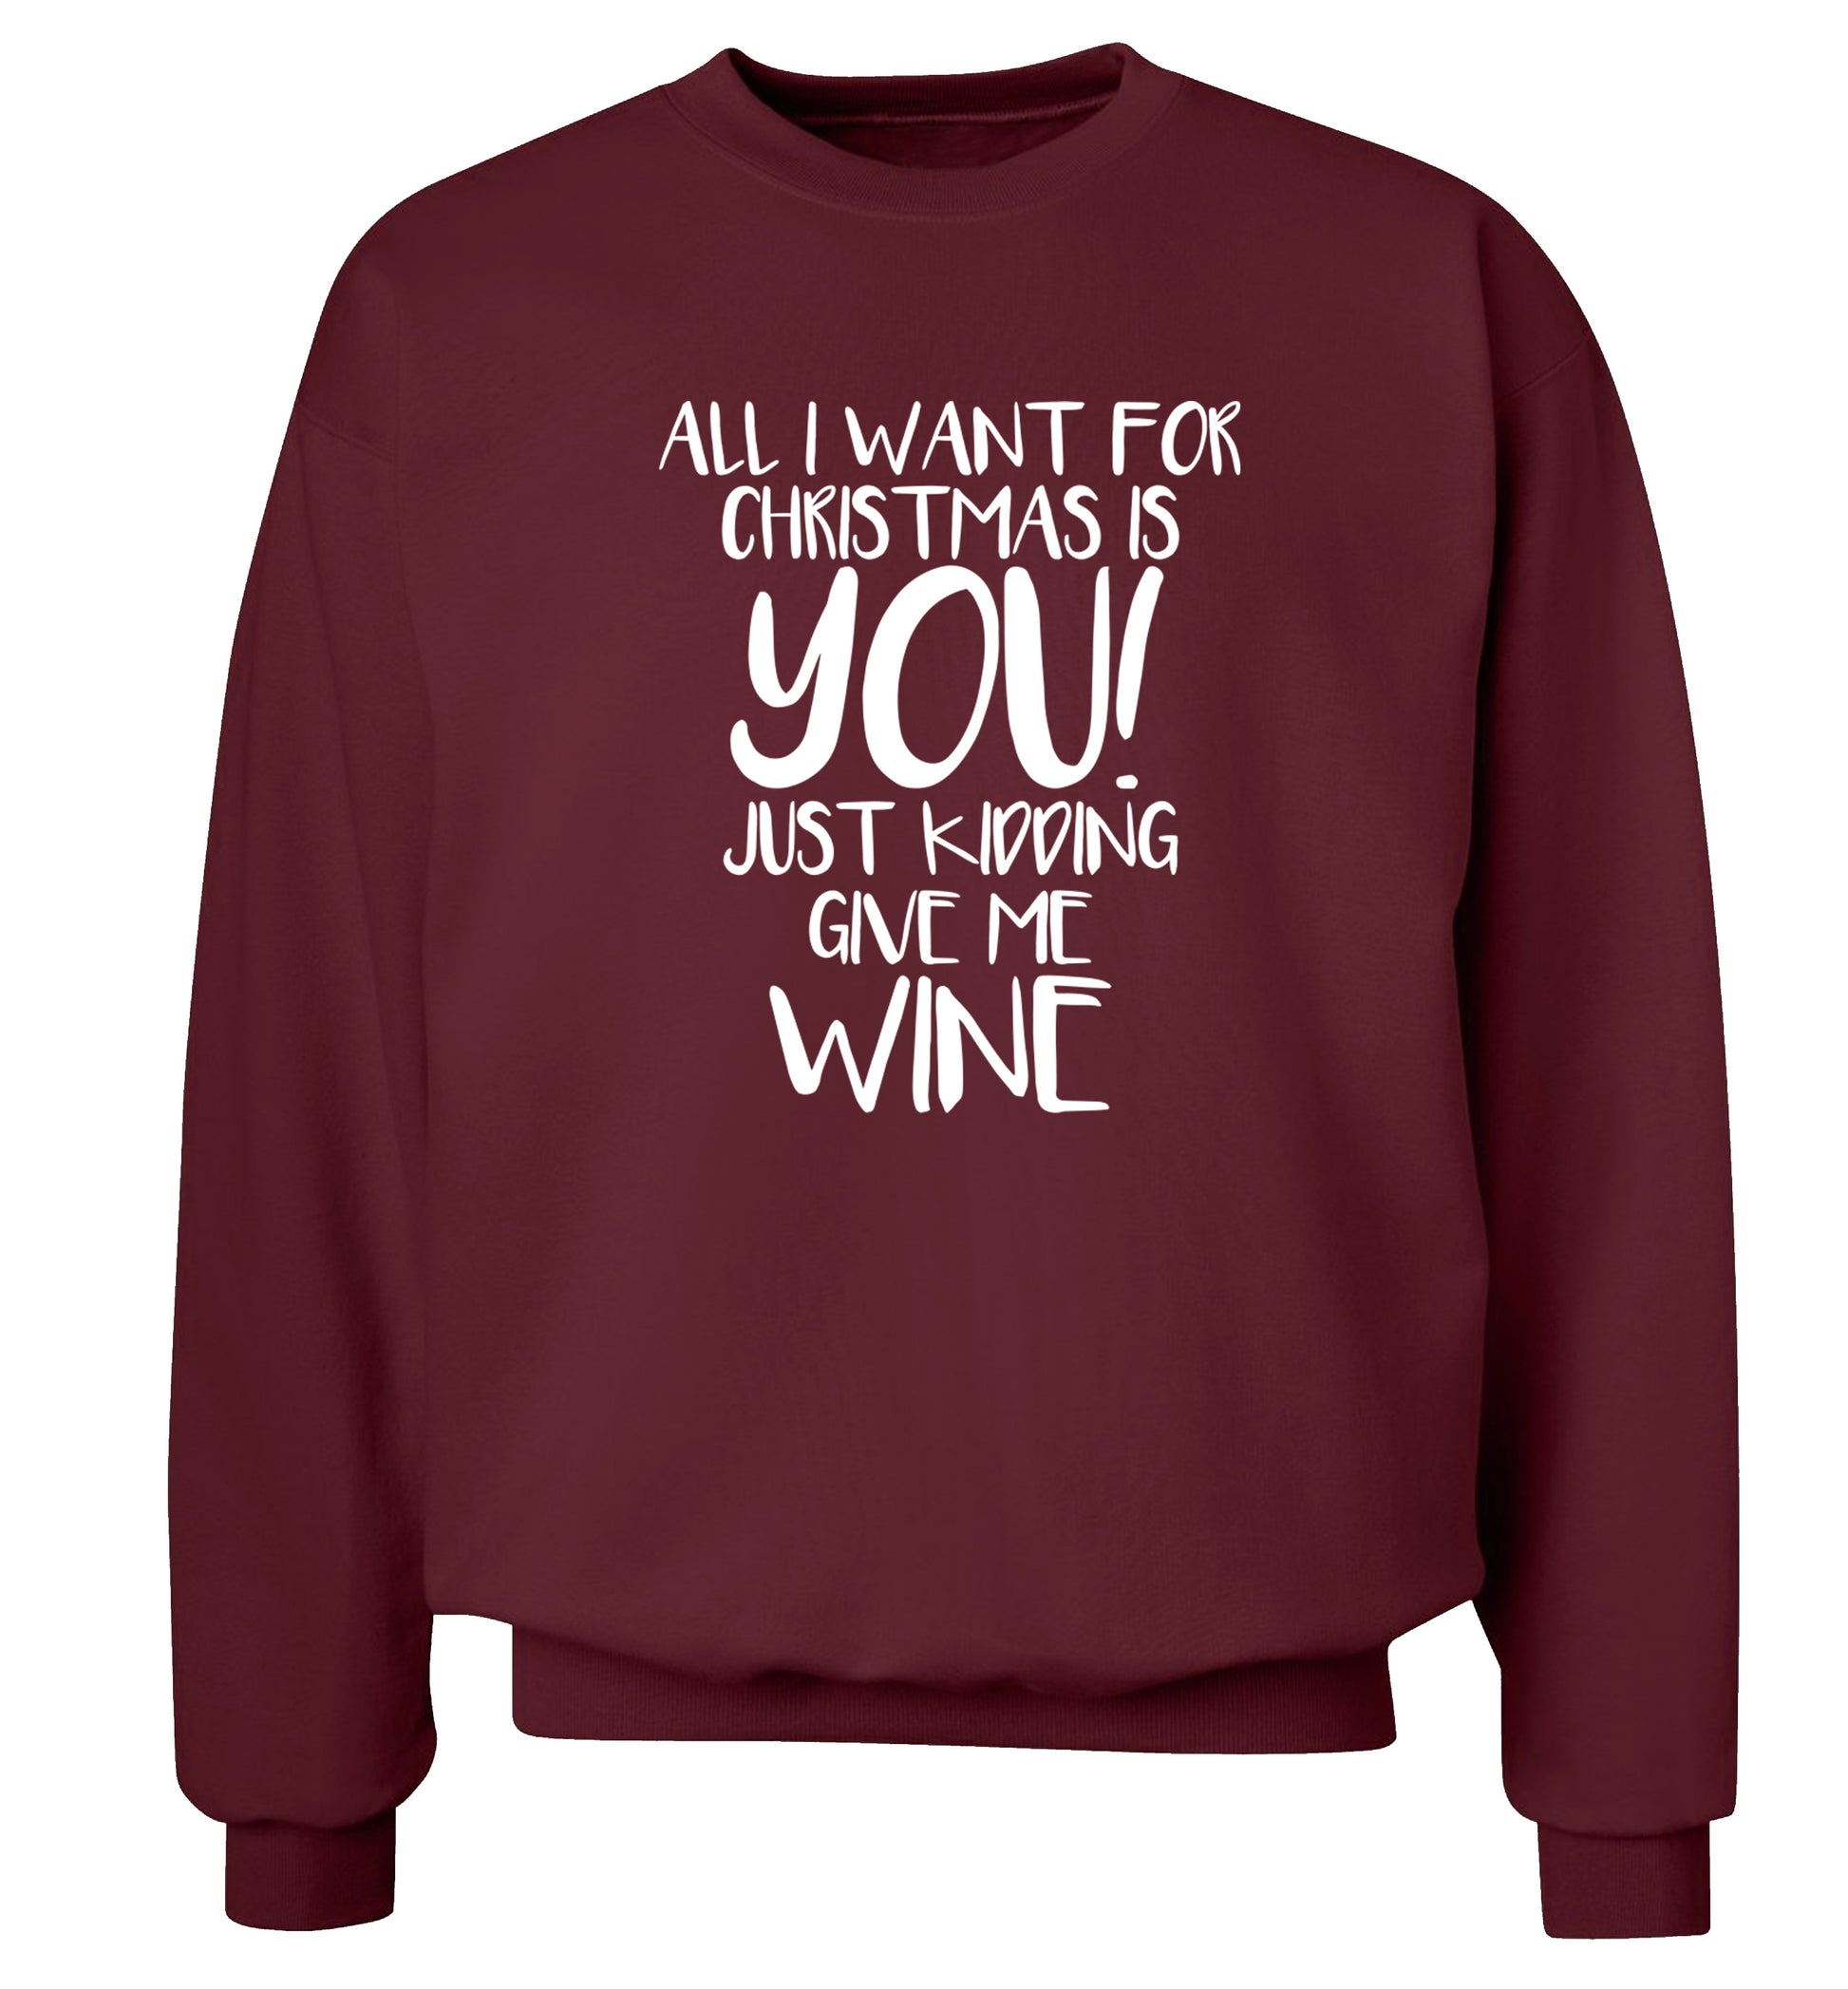 All I want for christmas is you just kidding give me the wine Adult's unisex maroon Sweater 2XL